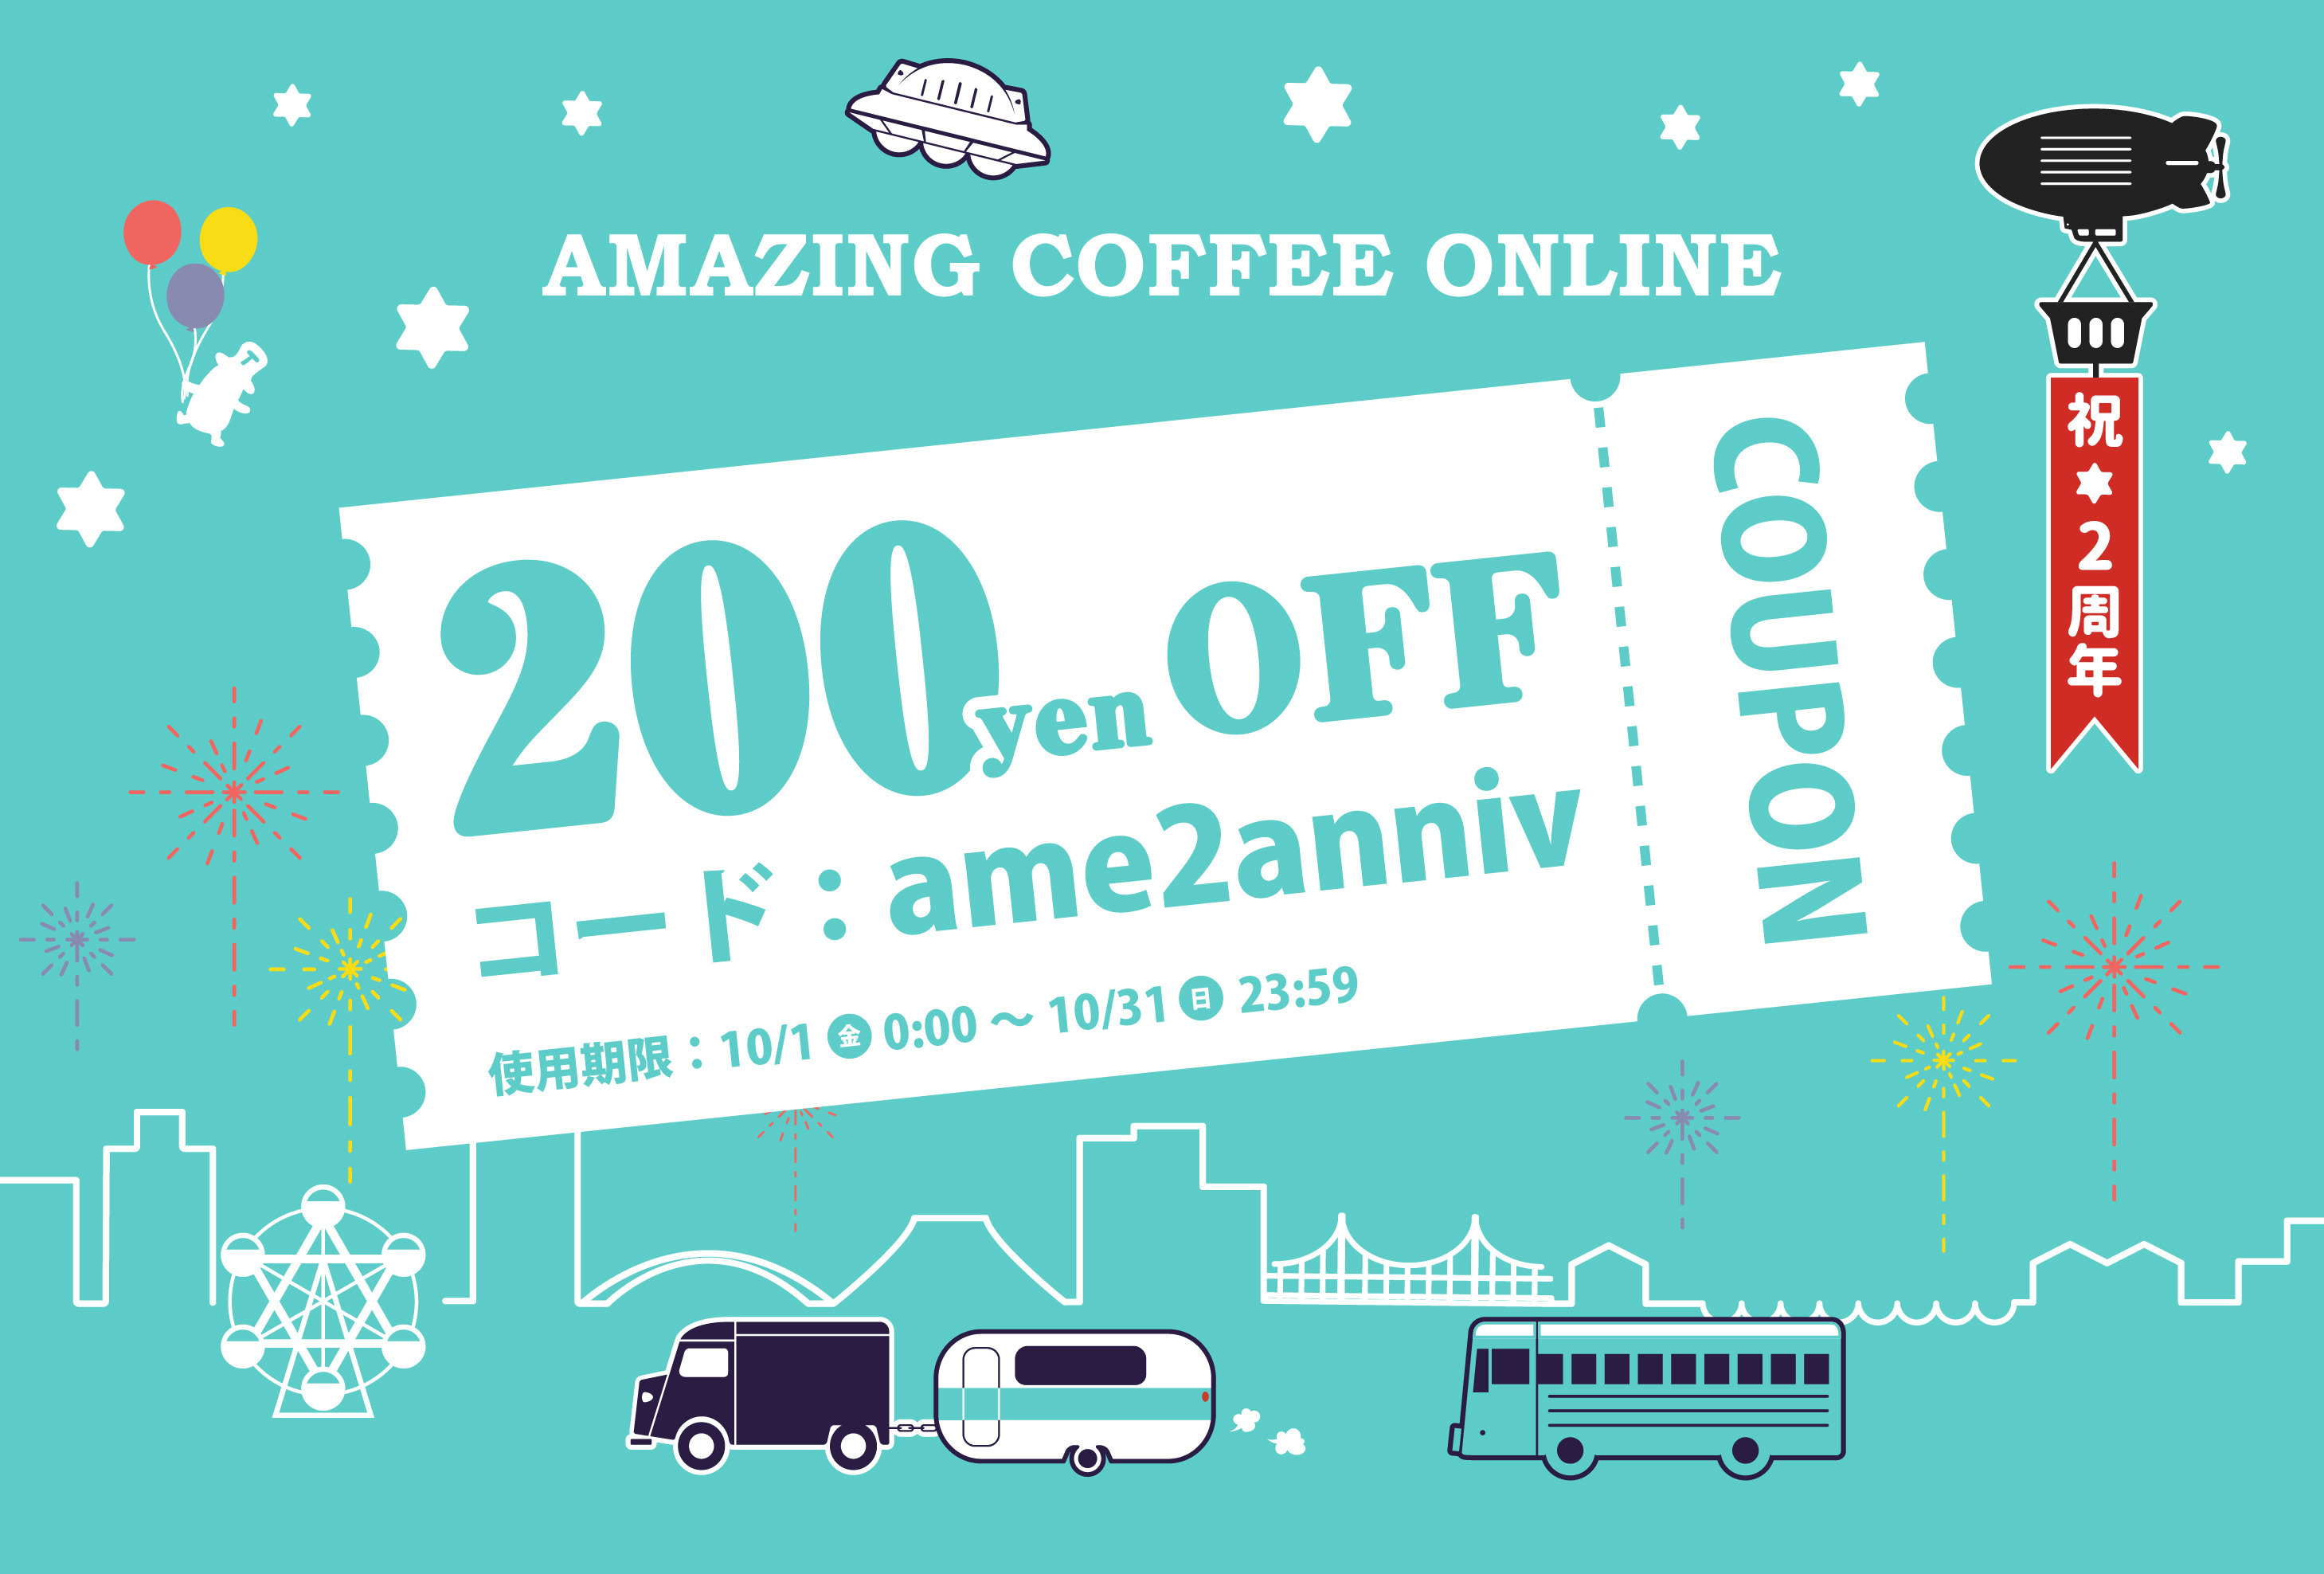 【AMAZING COFFEE ONLNE Special information✨】